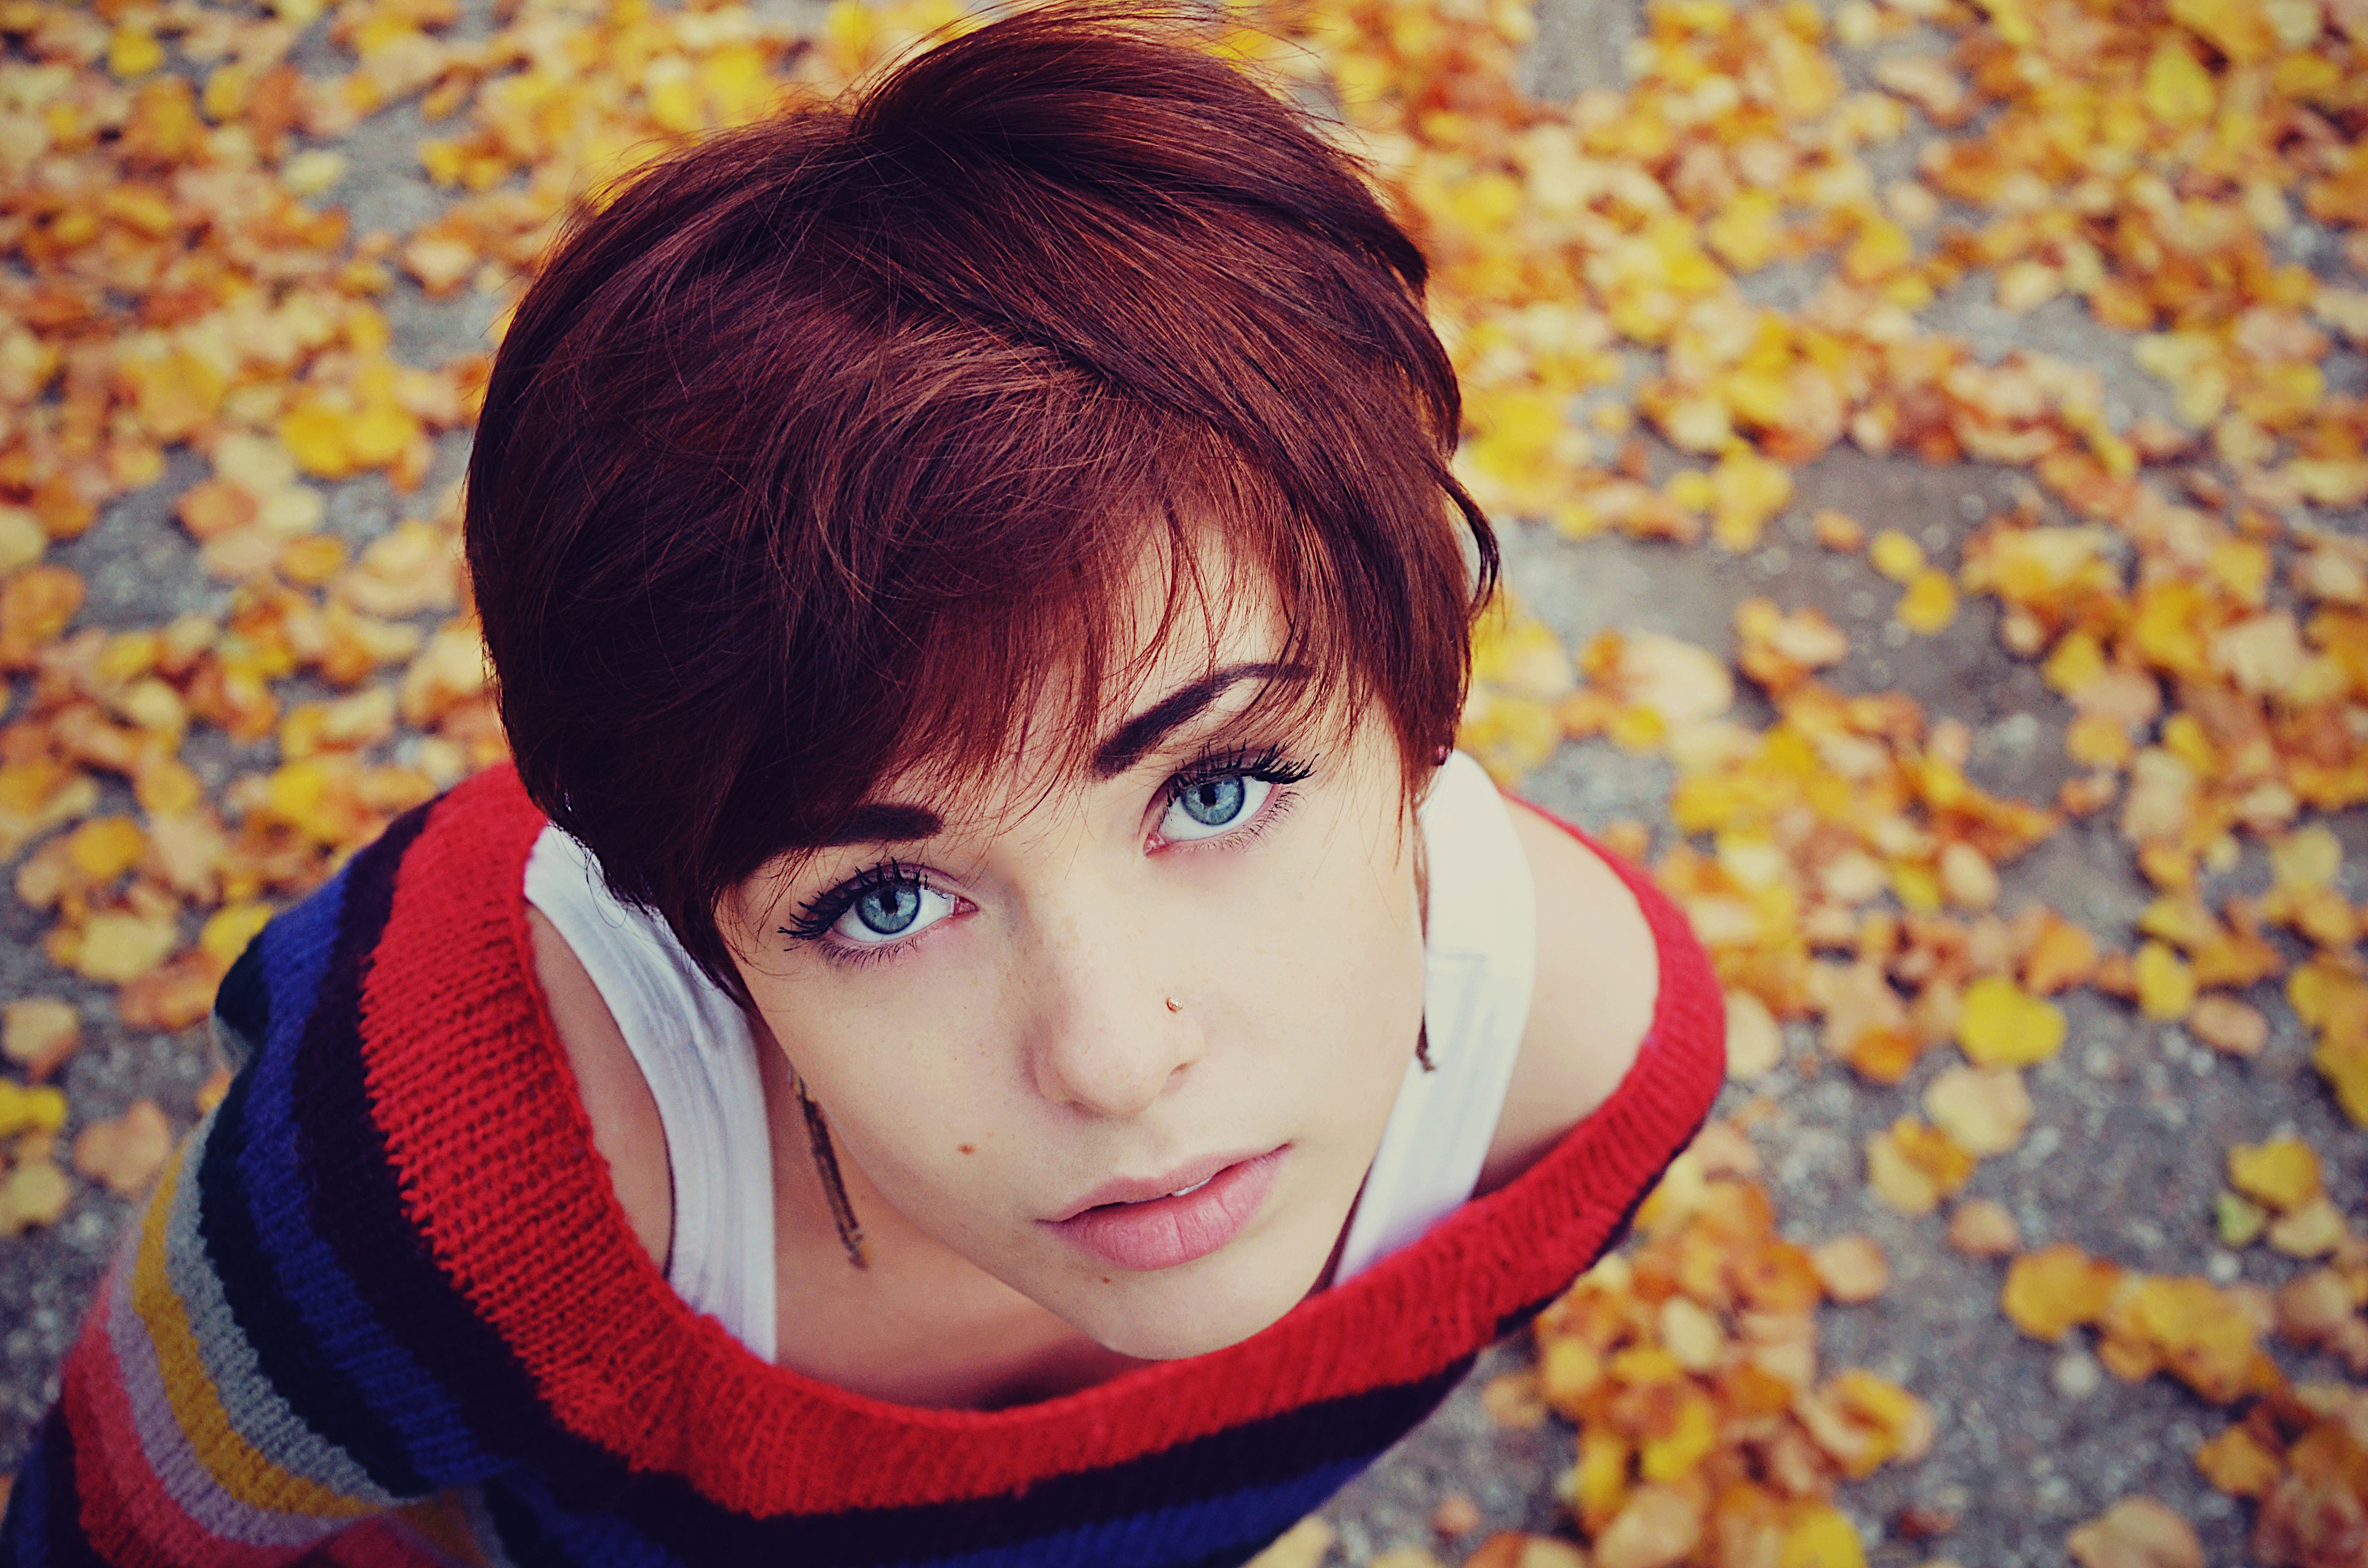 A girl with short hair looks at the camera